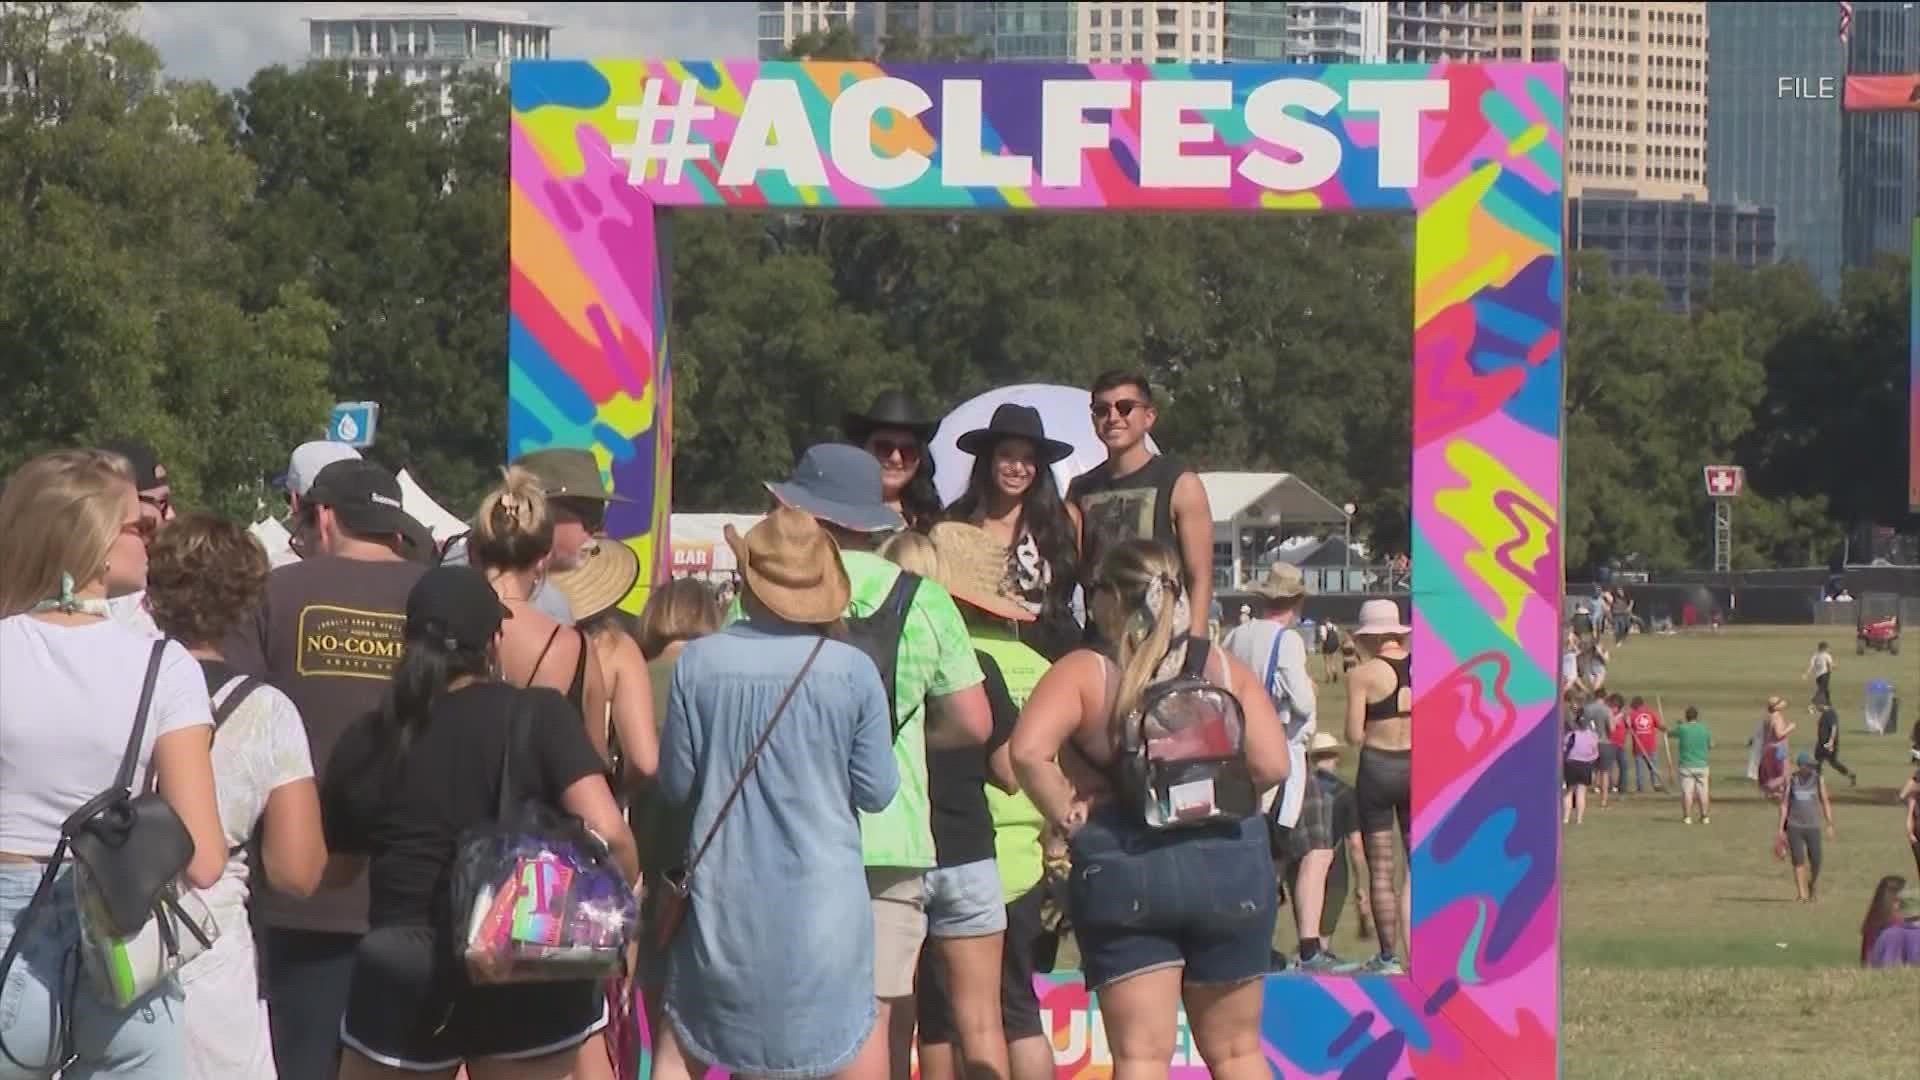 ACL Fest 2022 has begun setup, along with the new protocols associated with the festival. KVUE's Natalie Haddad breaks down what festival-goers can expect.